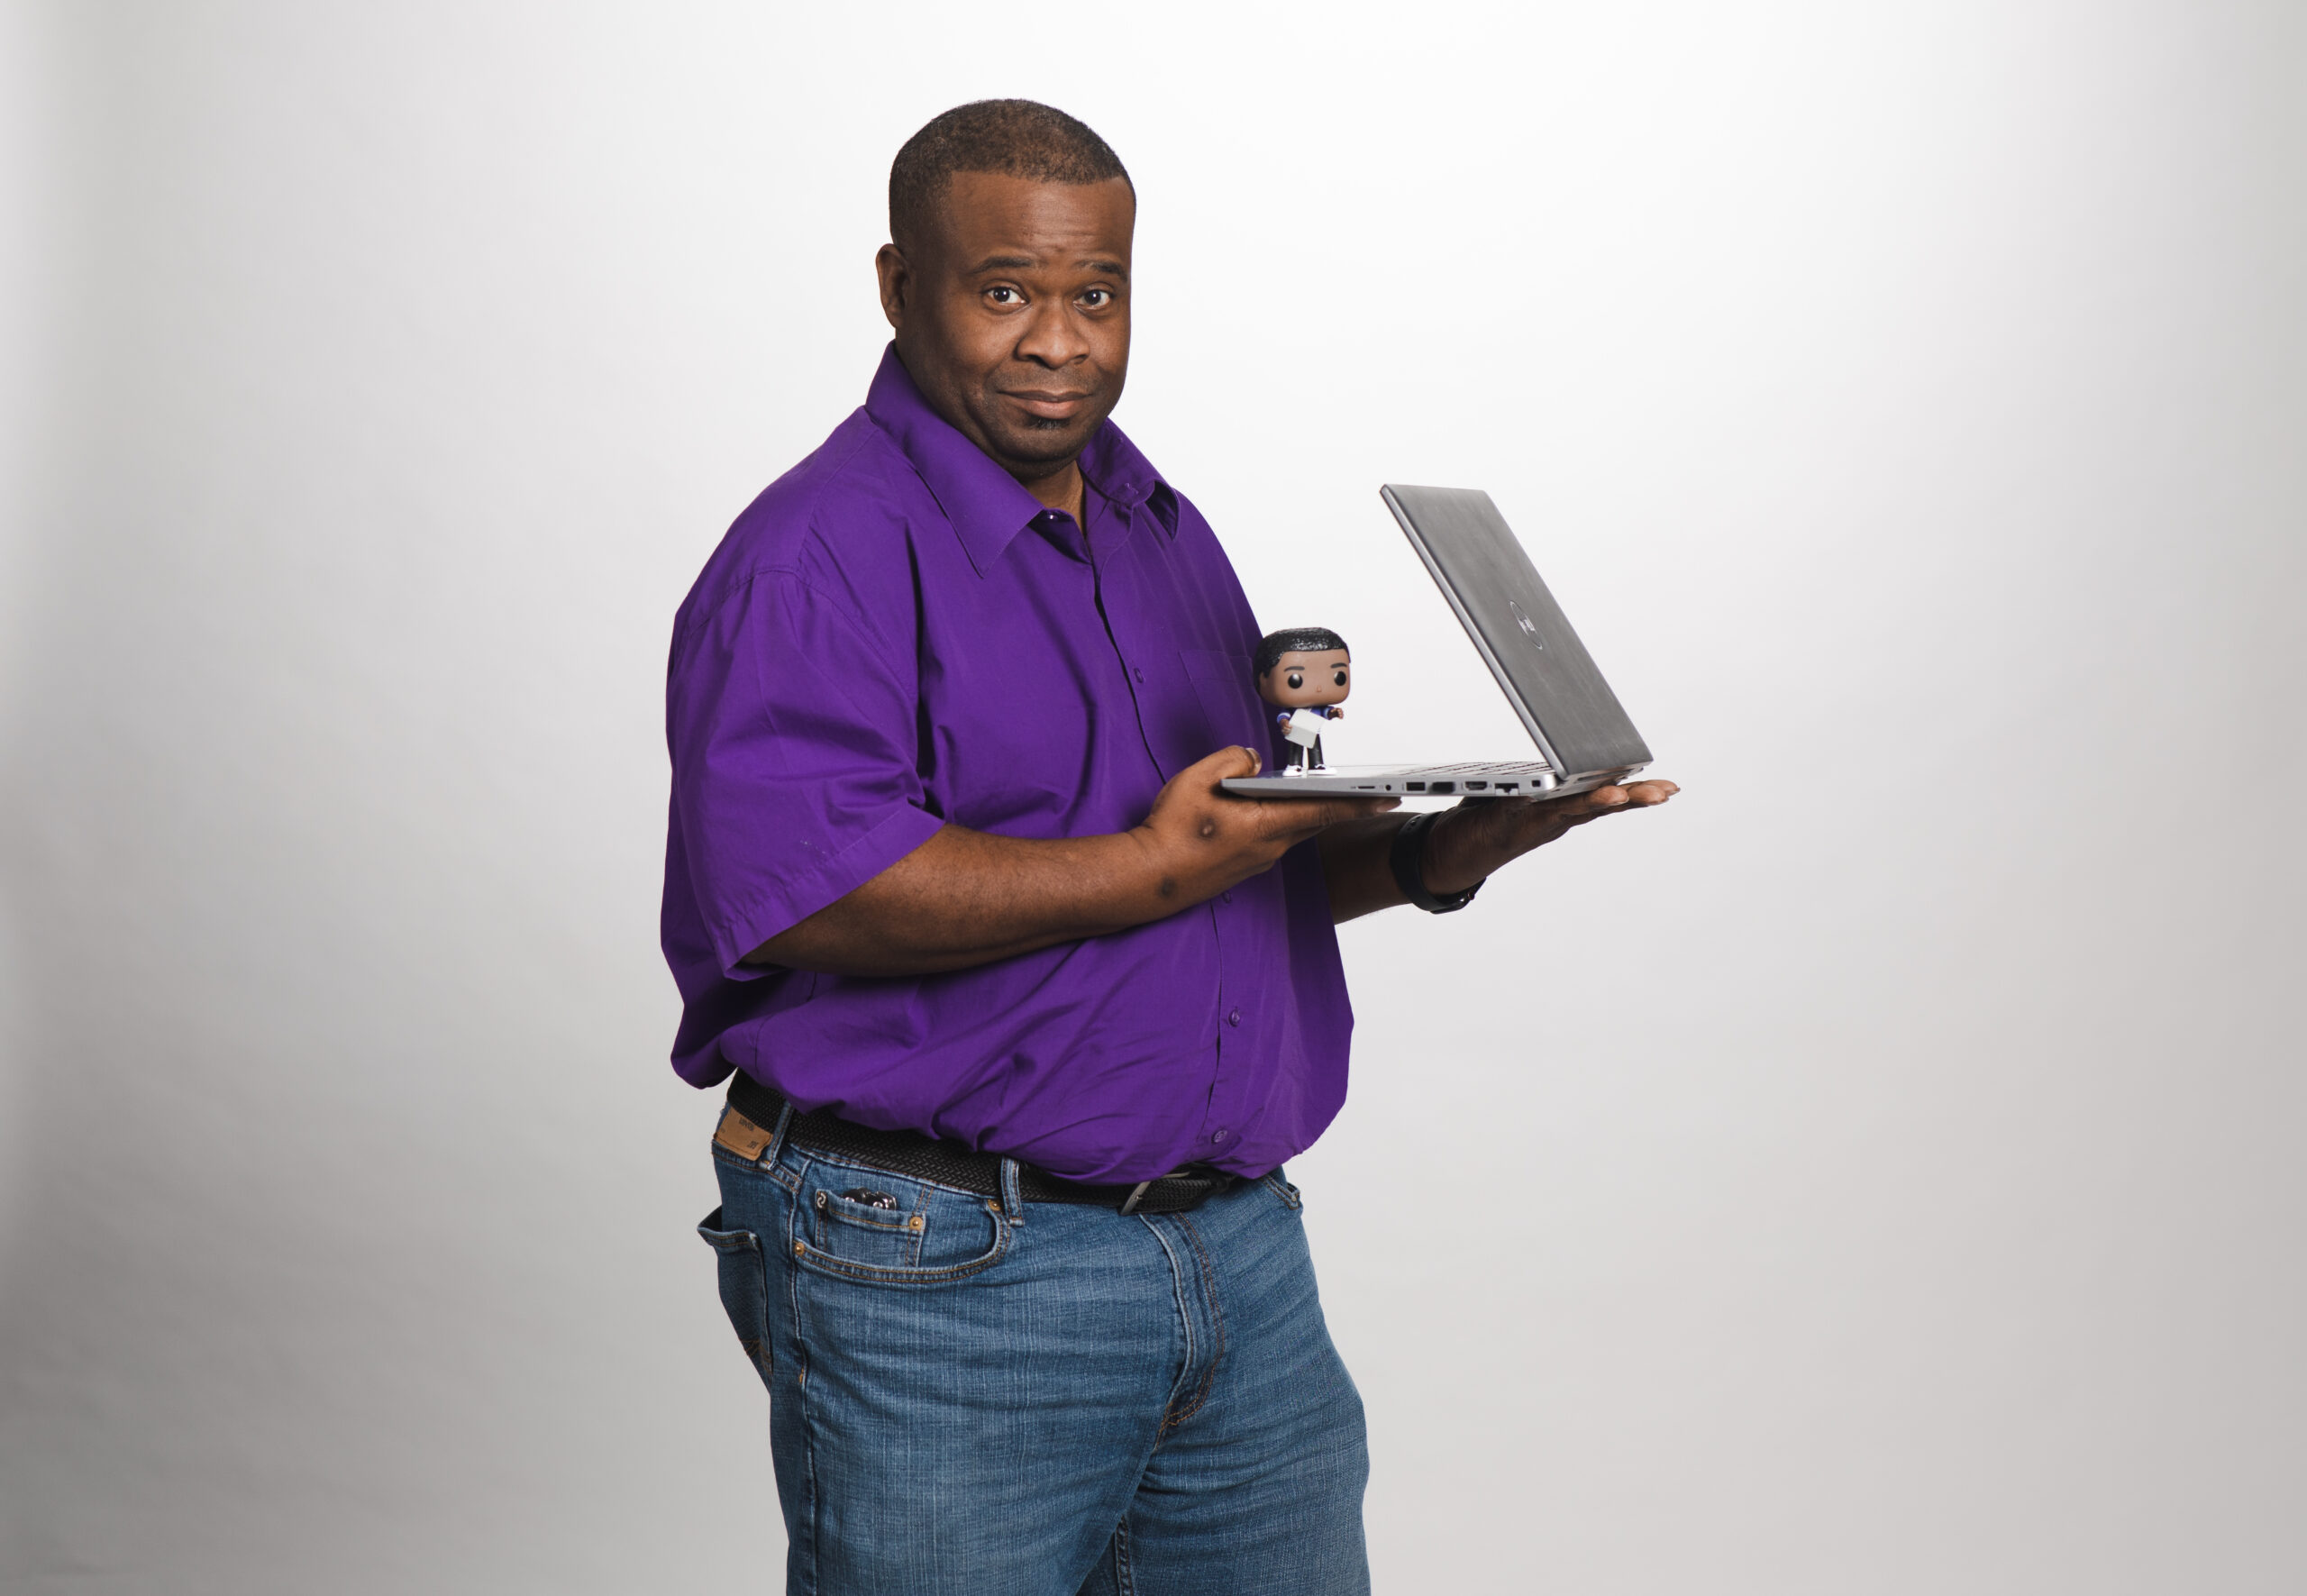 Picture of damian holding a laptop with a miniture representation of himself